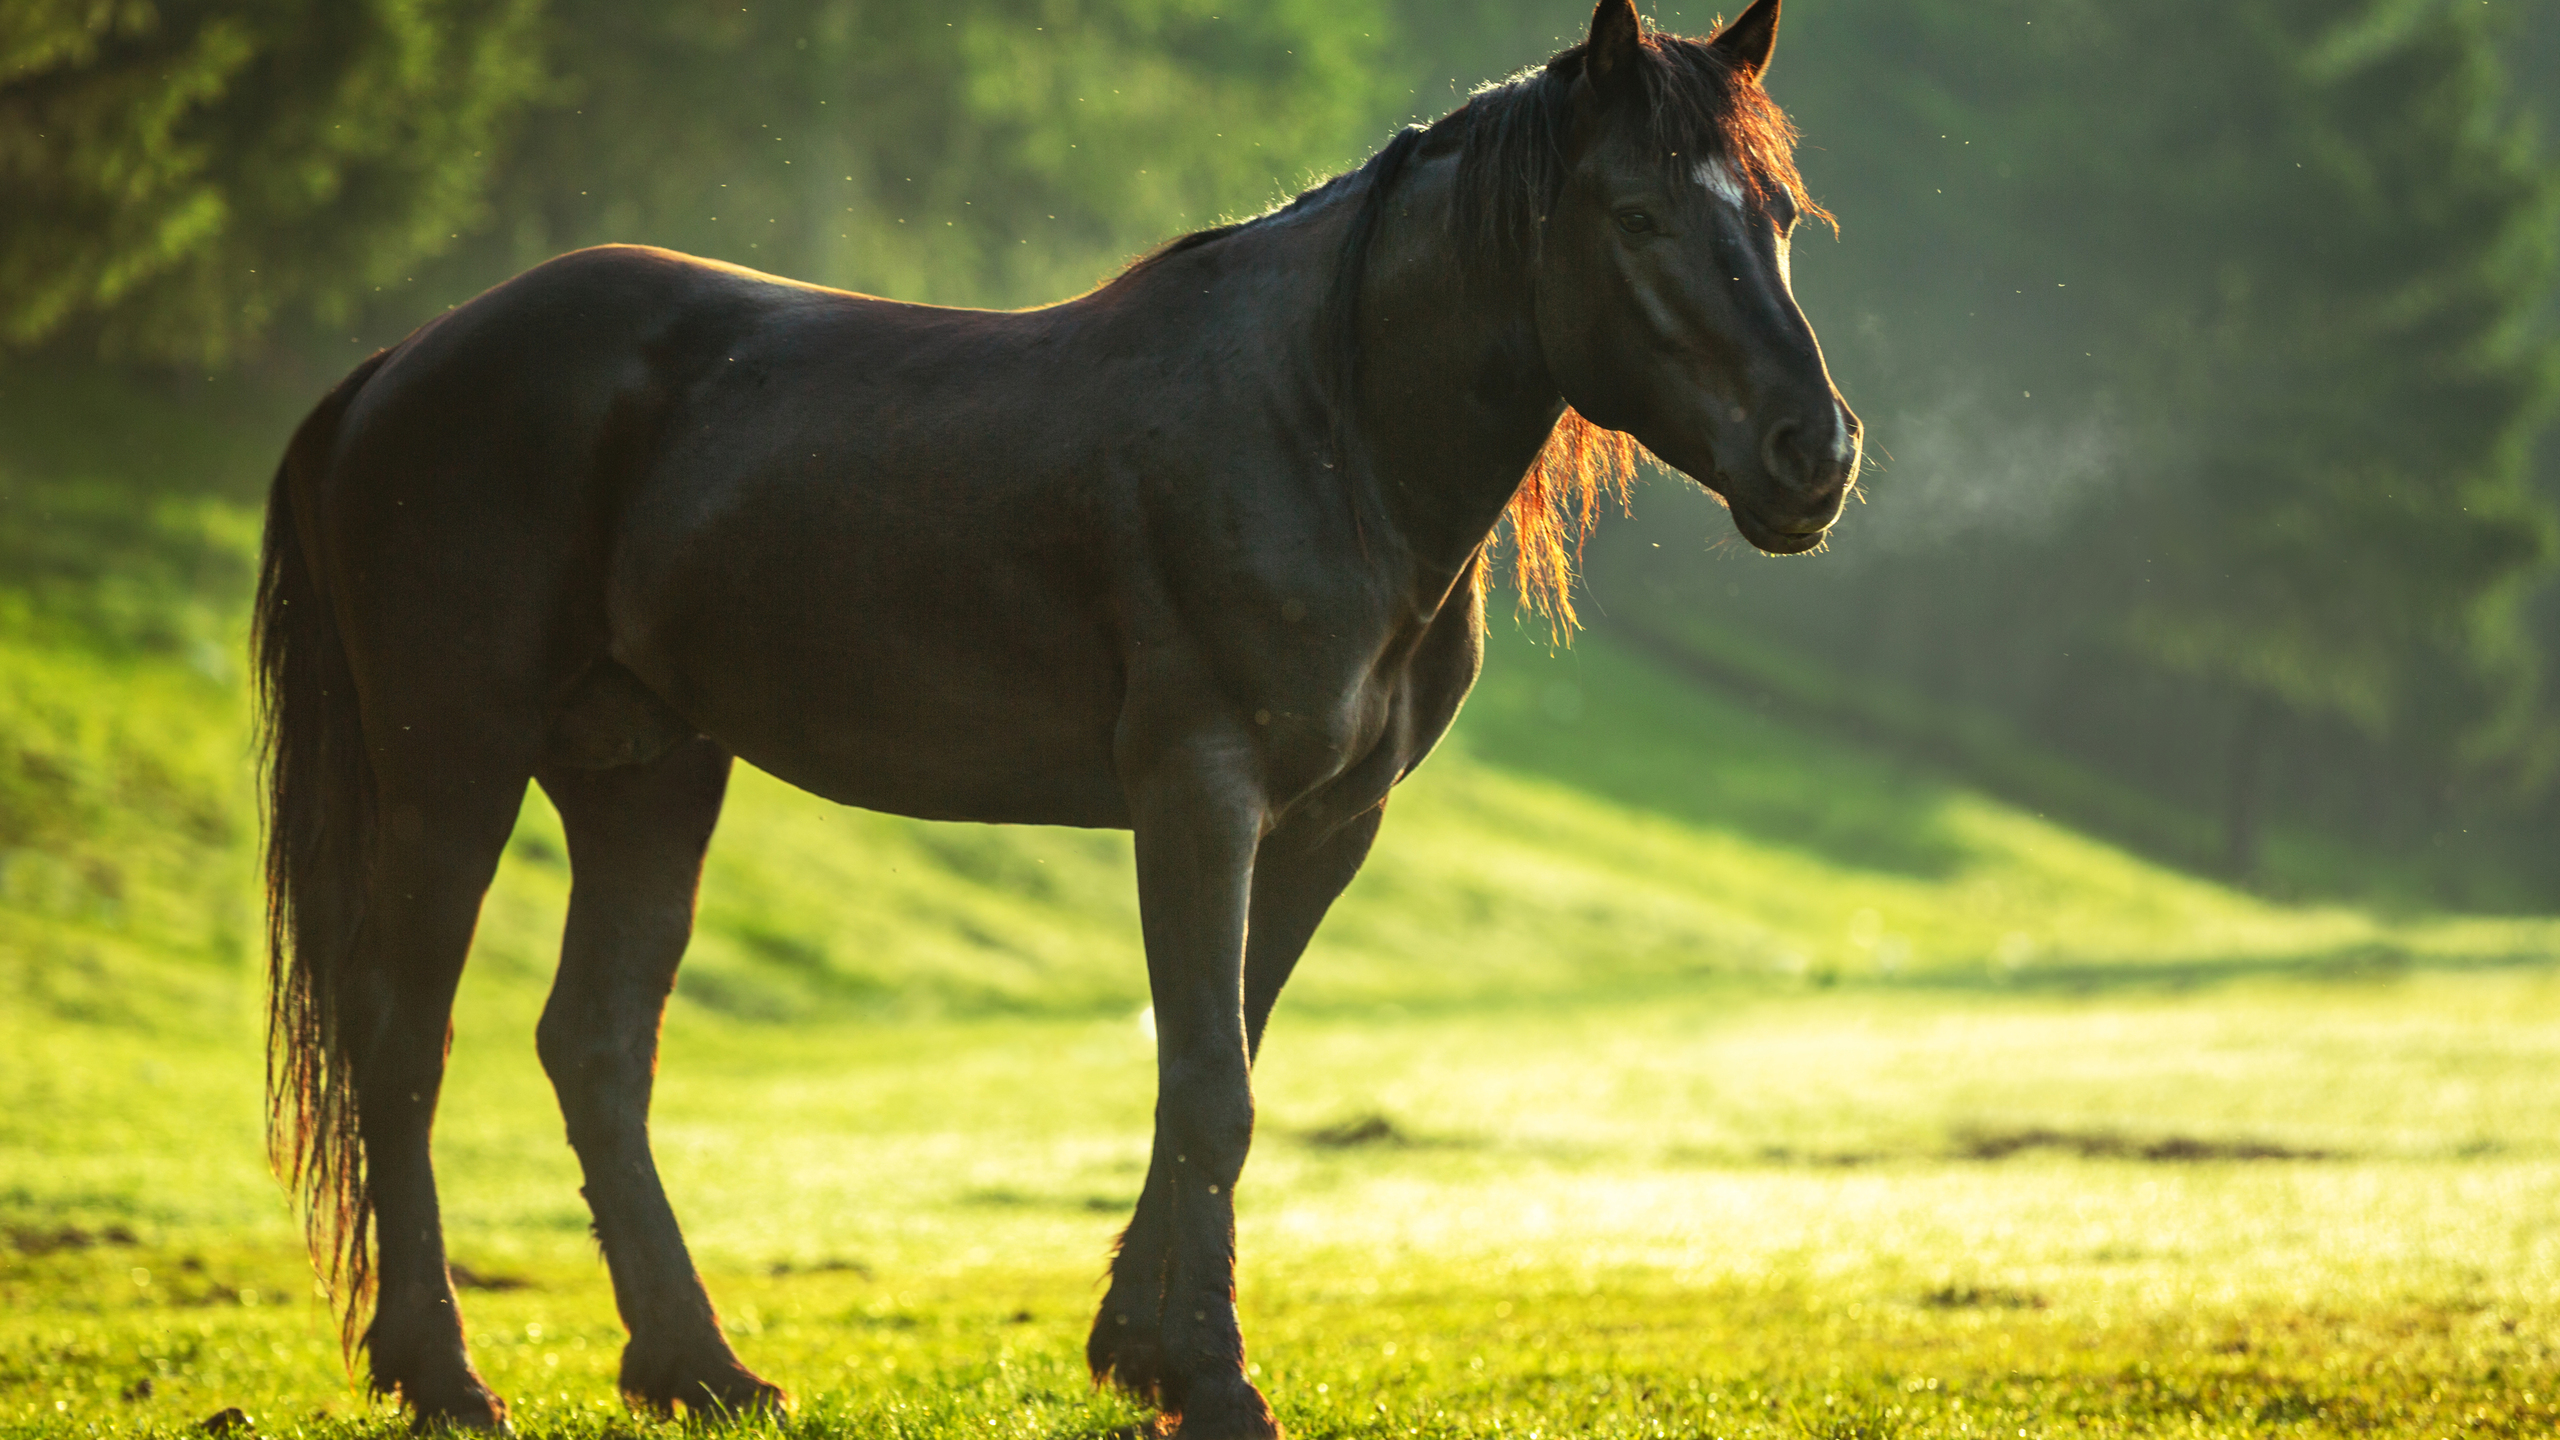 2560x1440 Horse 4k 1440p Resolution Hd 4k Wallpapers Images Backgrounds Photos And Pictures